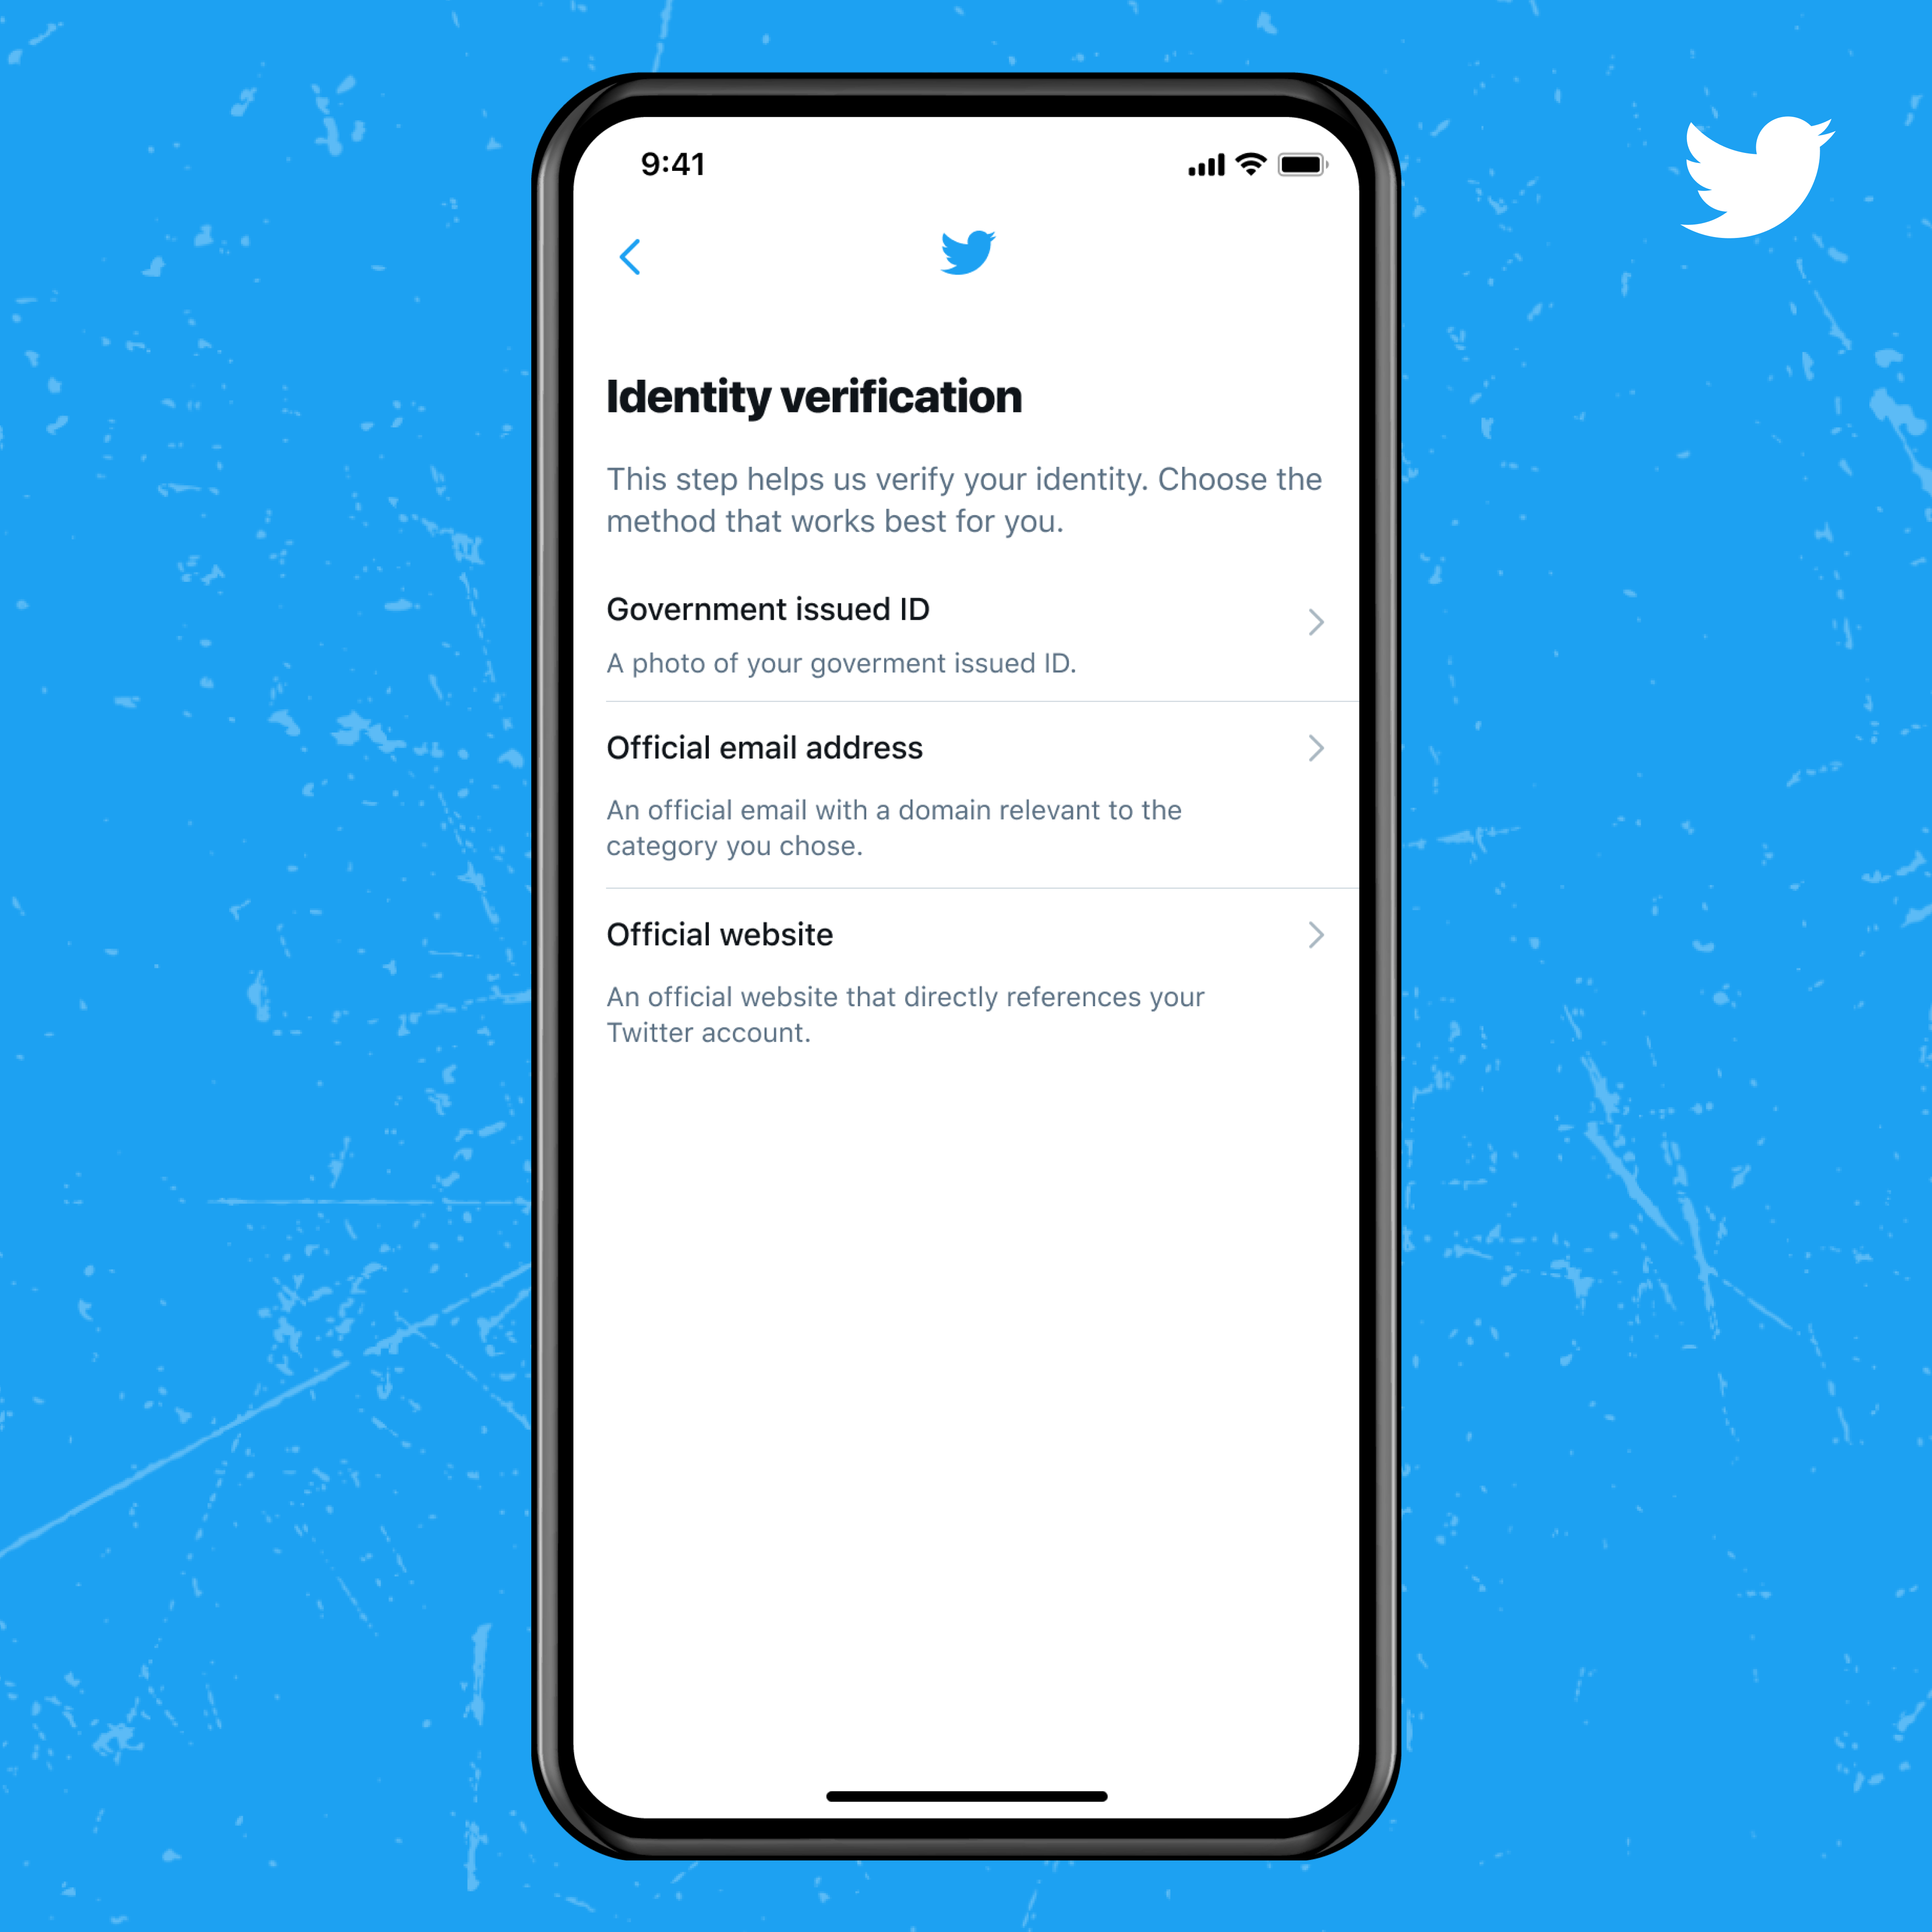 Twitter Is Making It Easier to Request a Verified Account – The Hollywood  Reporter